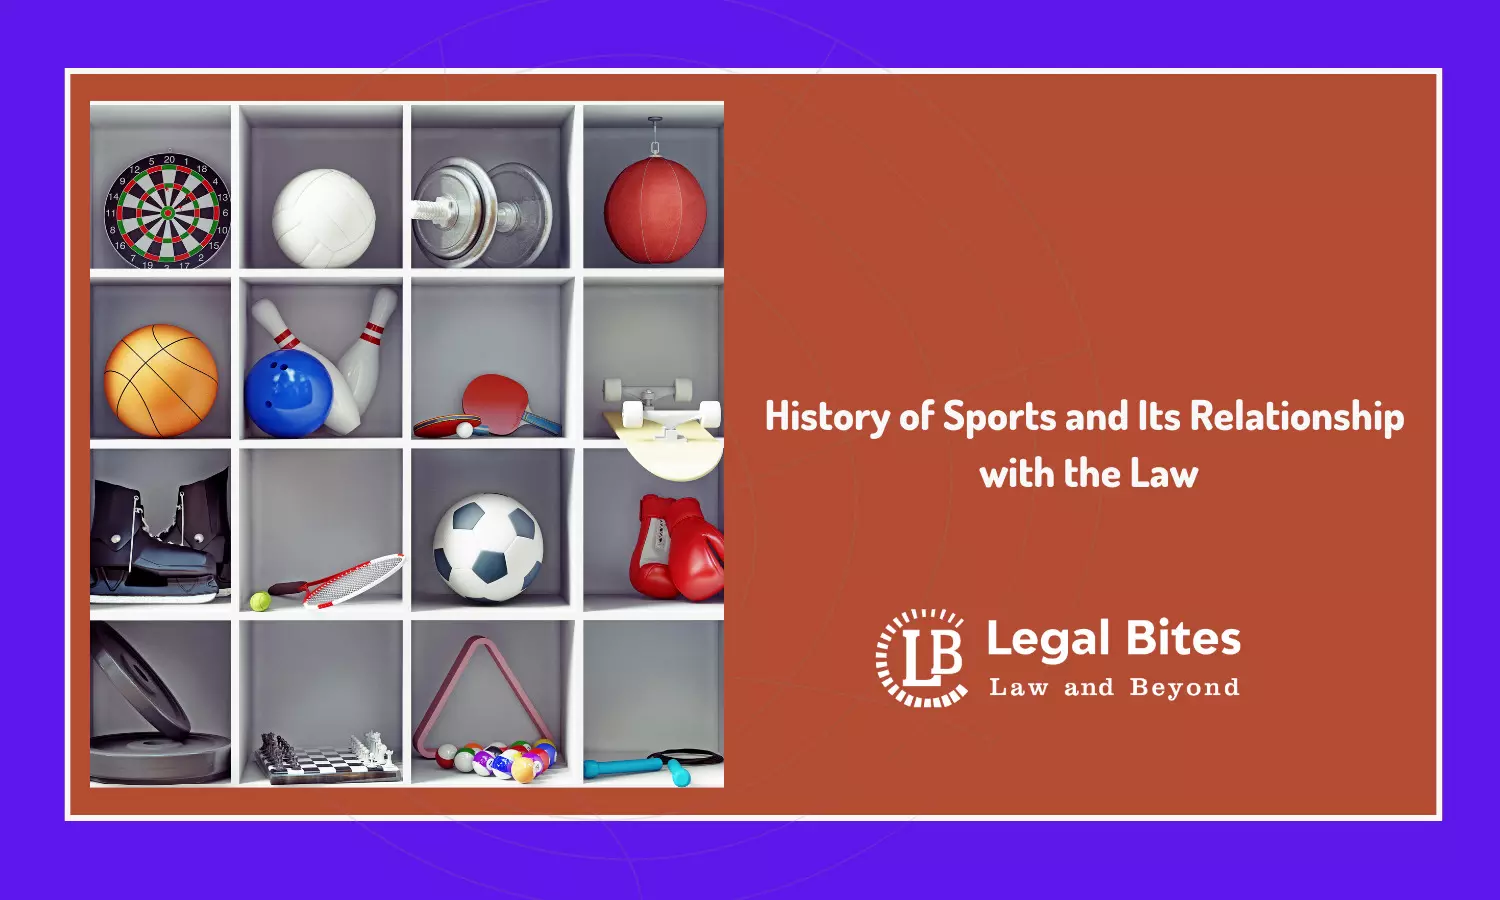 History of Sports and Its Relationship with the Law